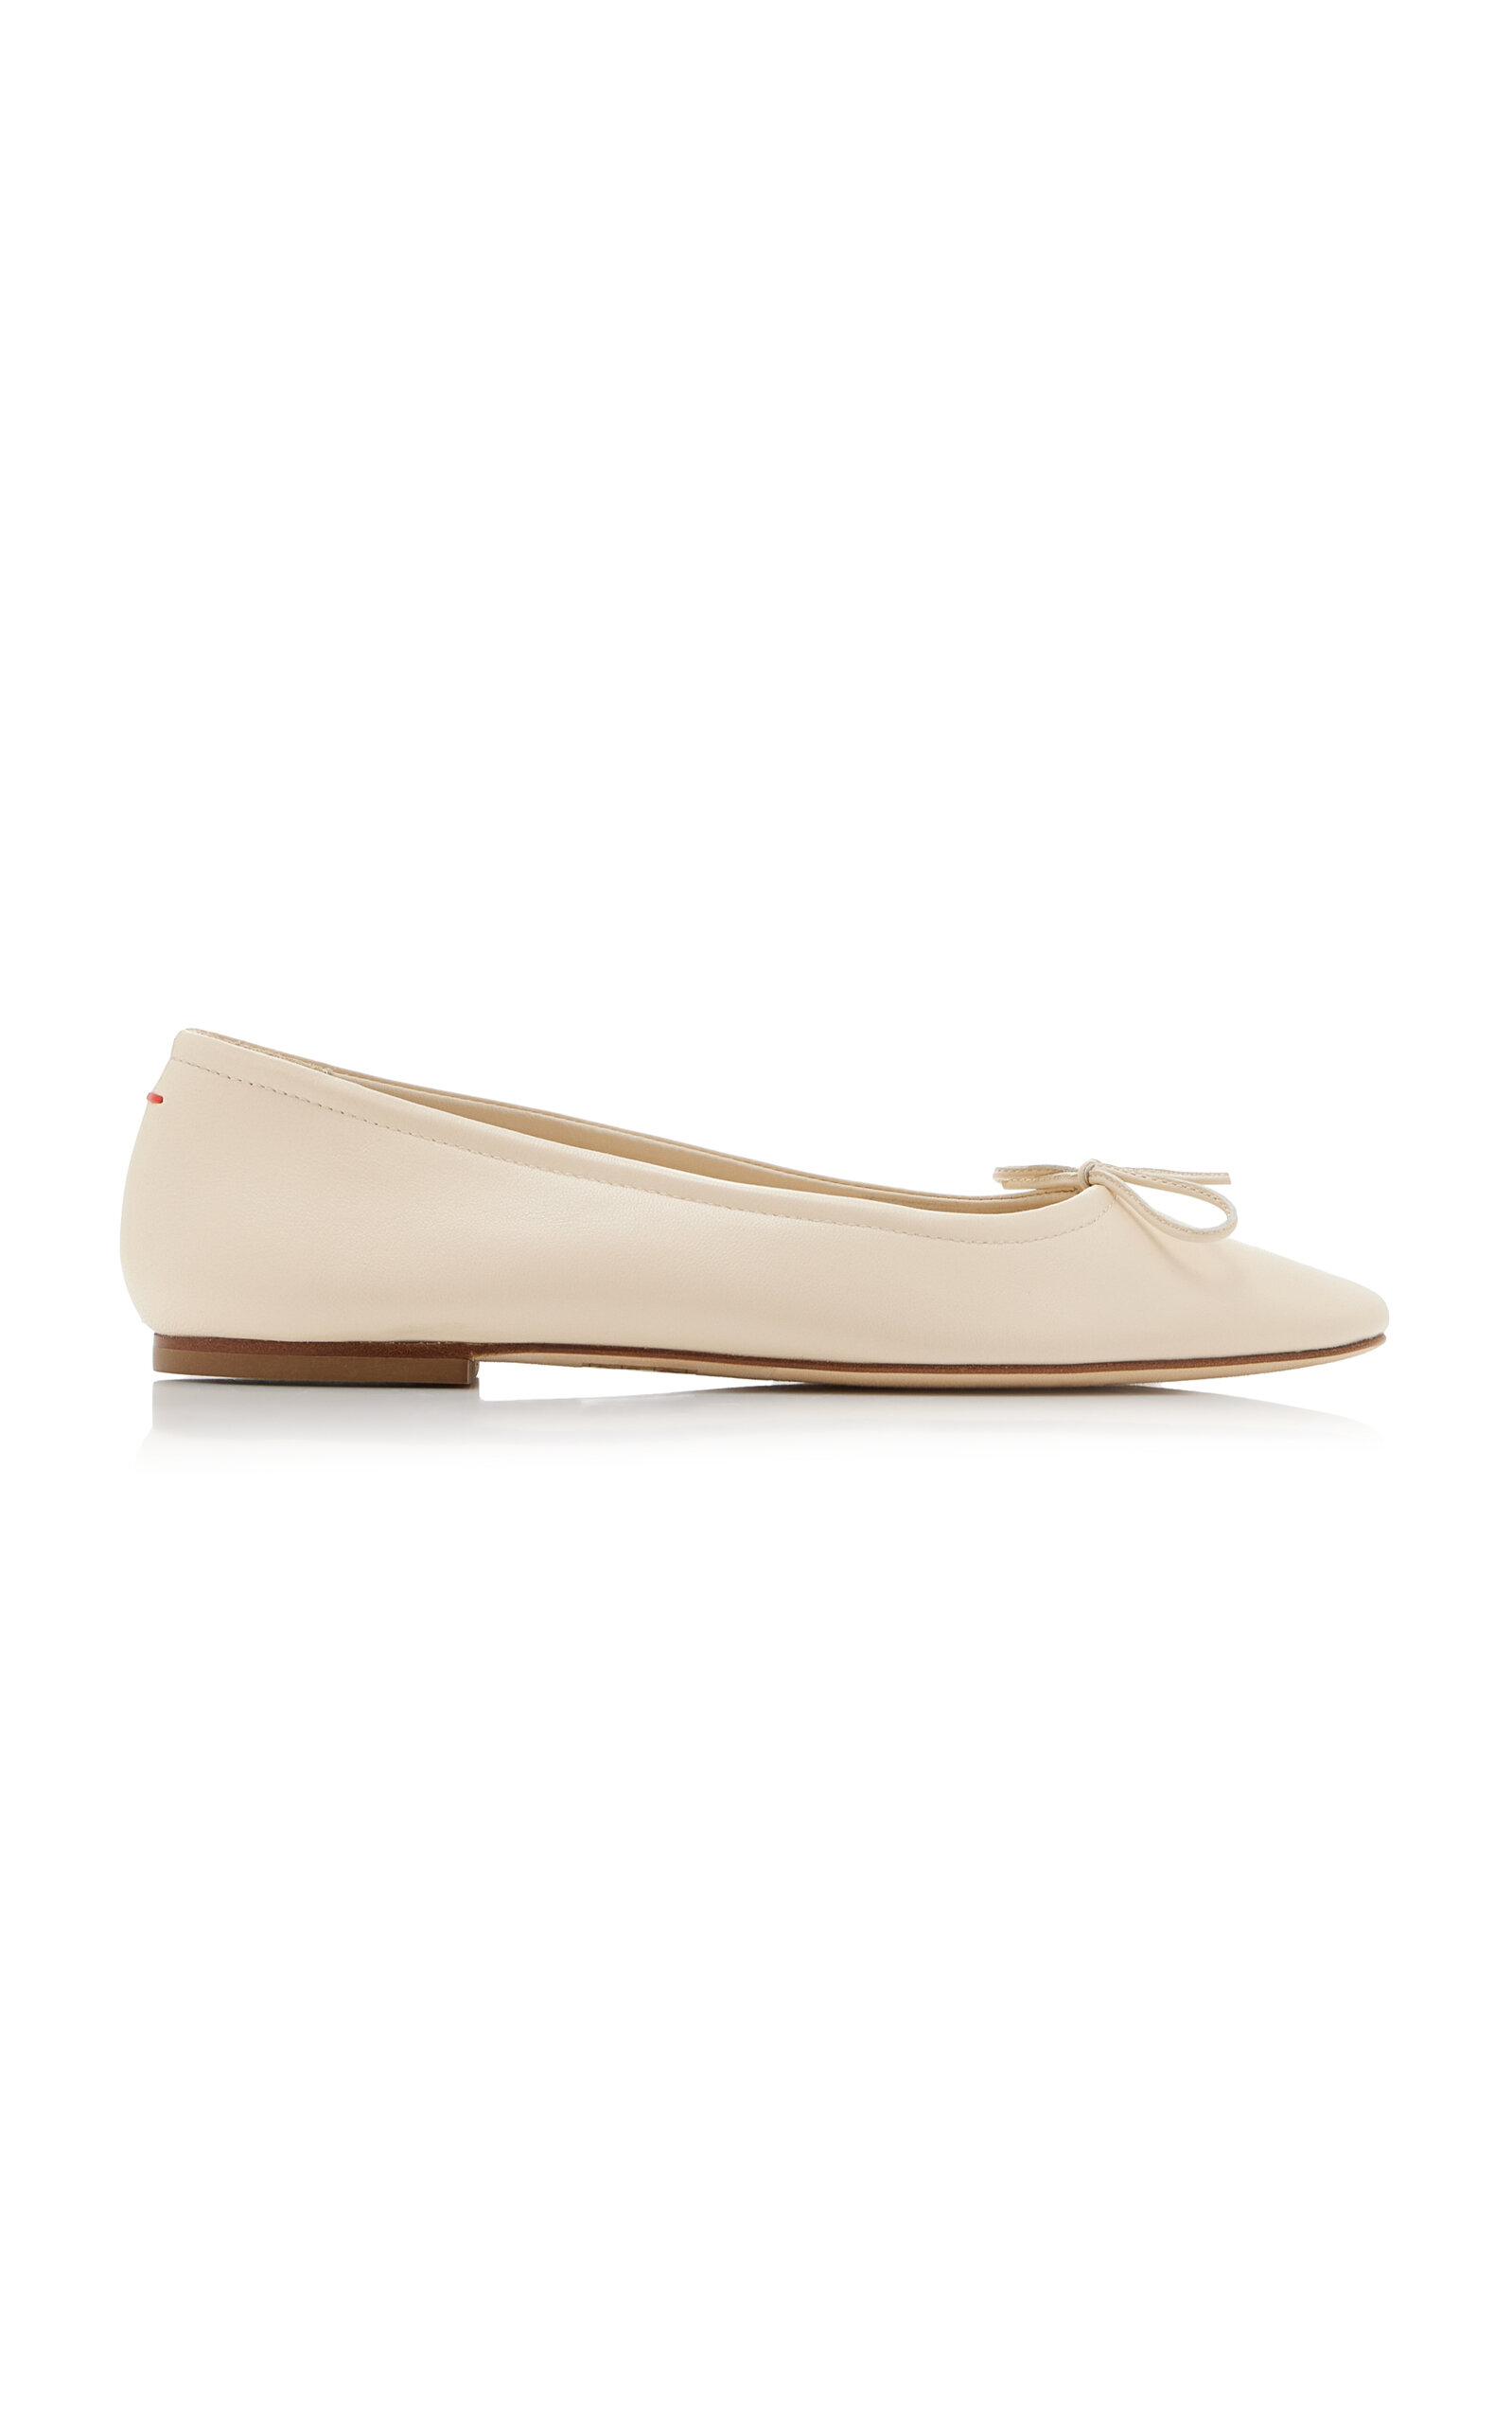 Aeyde Delfina Leather Flats In White